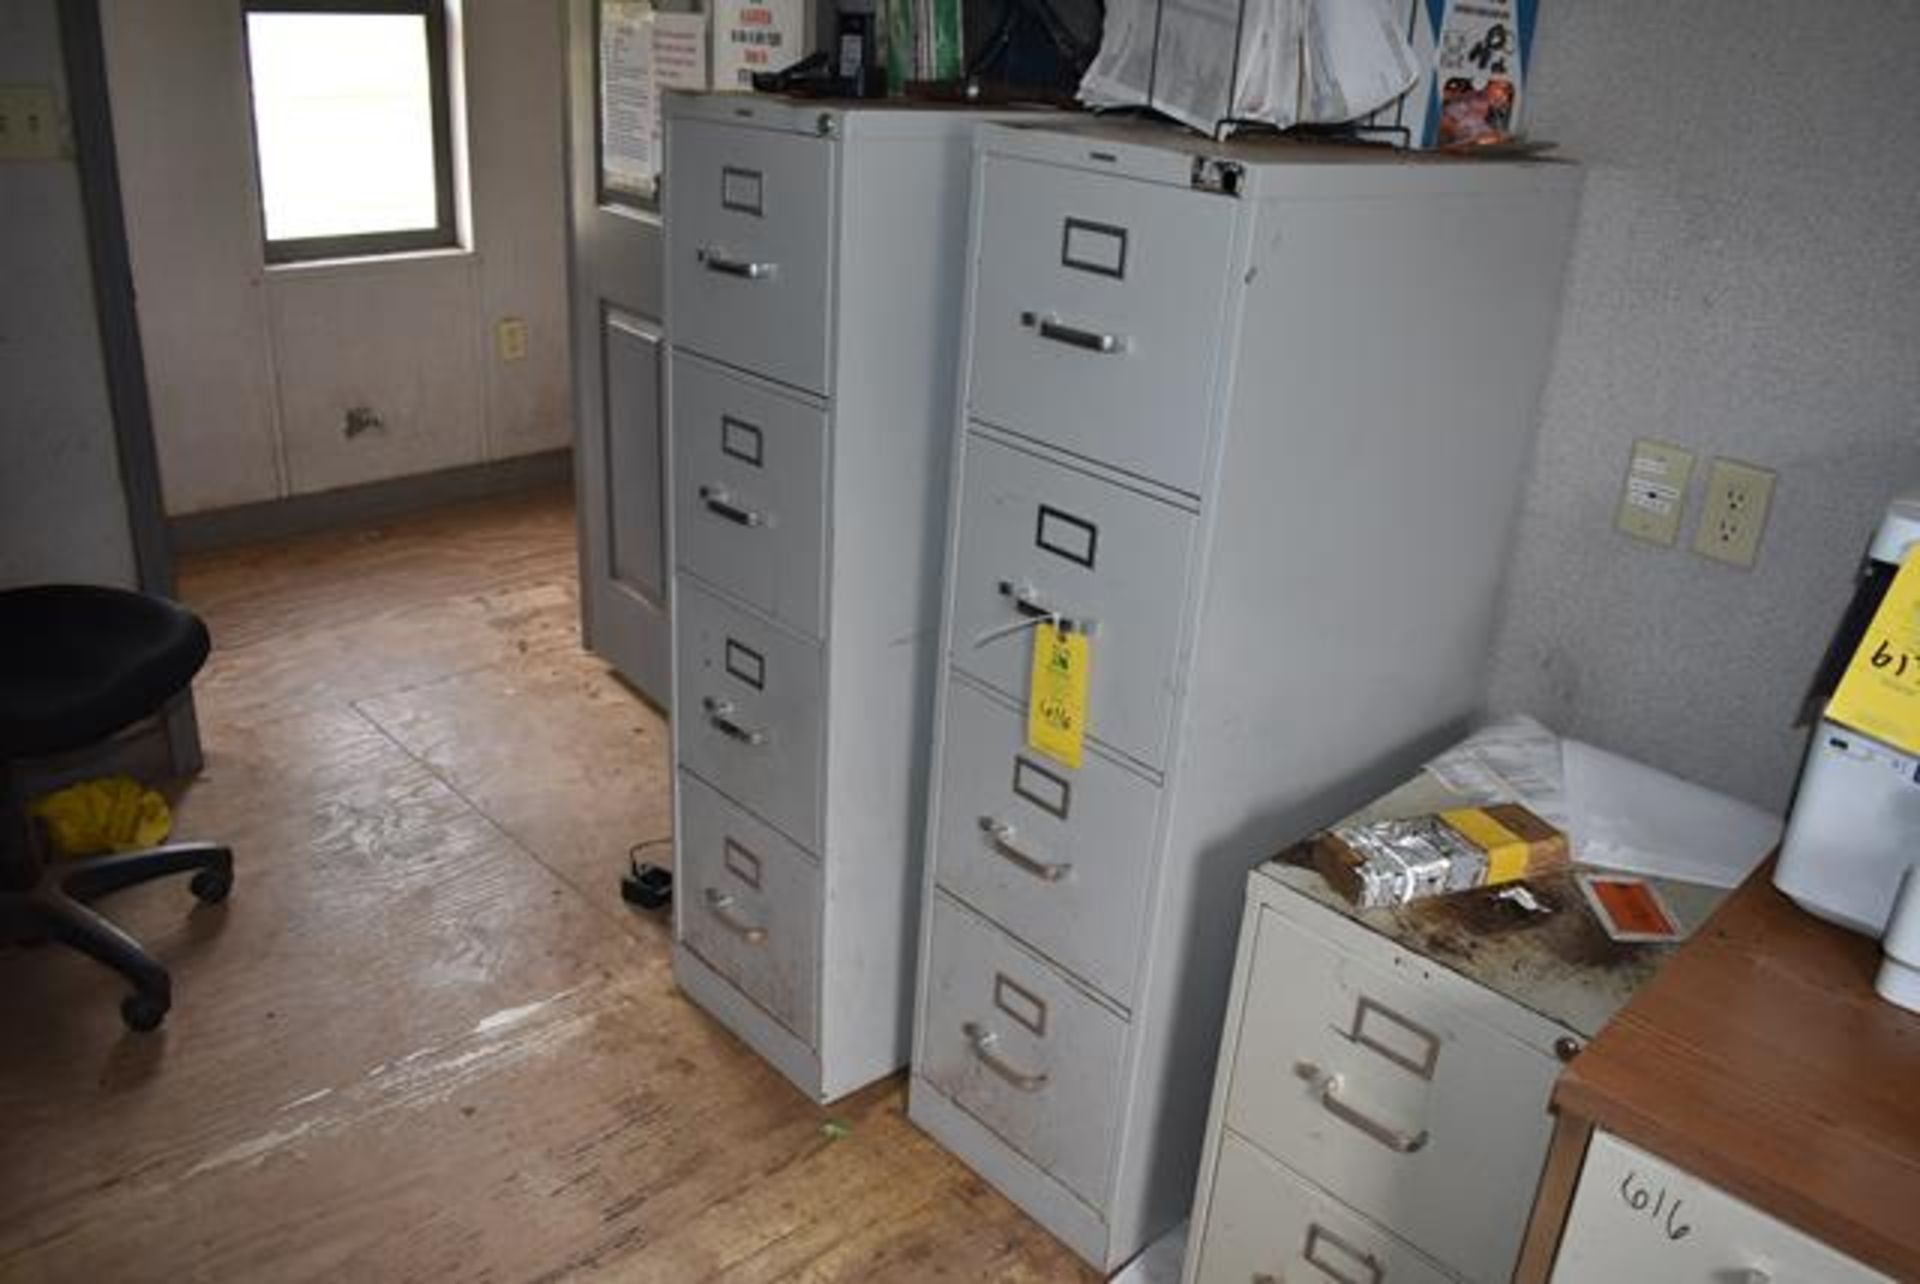 Office Contents - Desk, Microwave, File Cabinets - Image 2 of 3